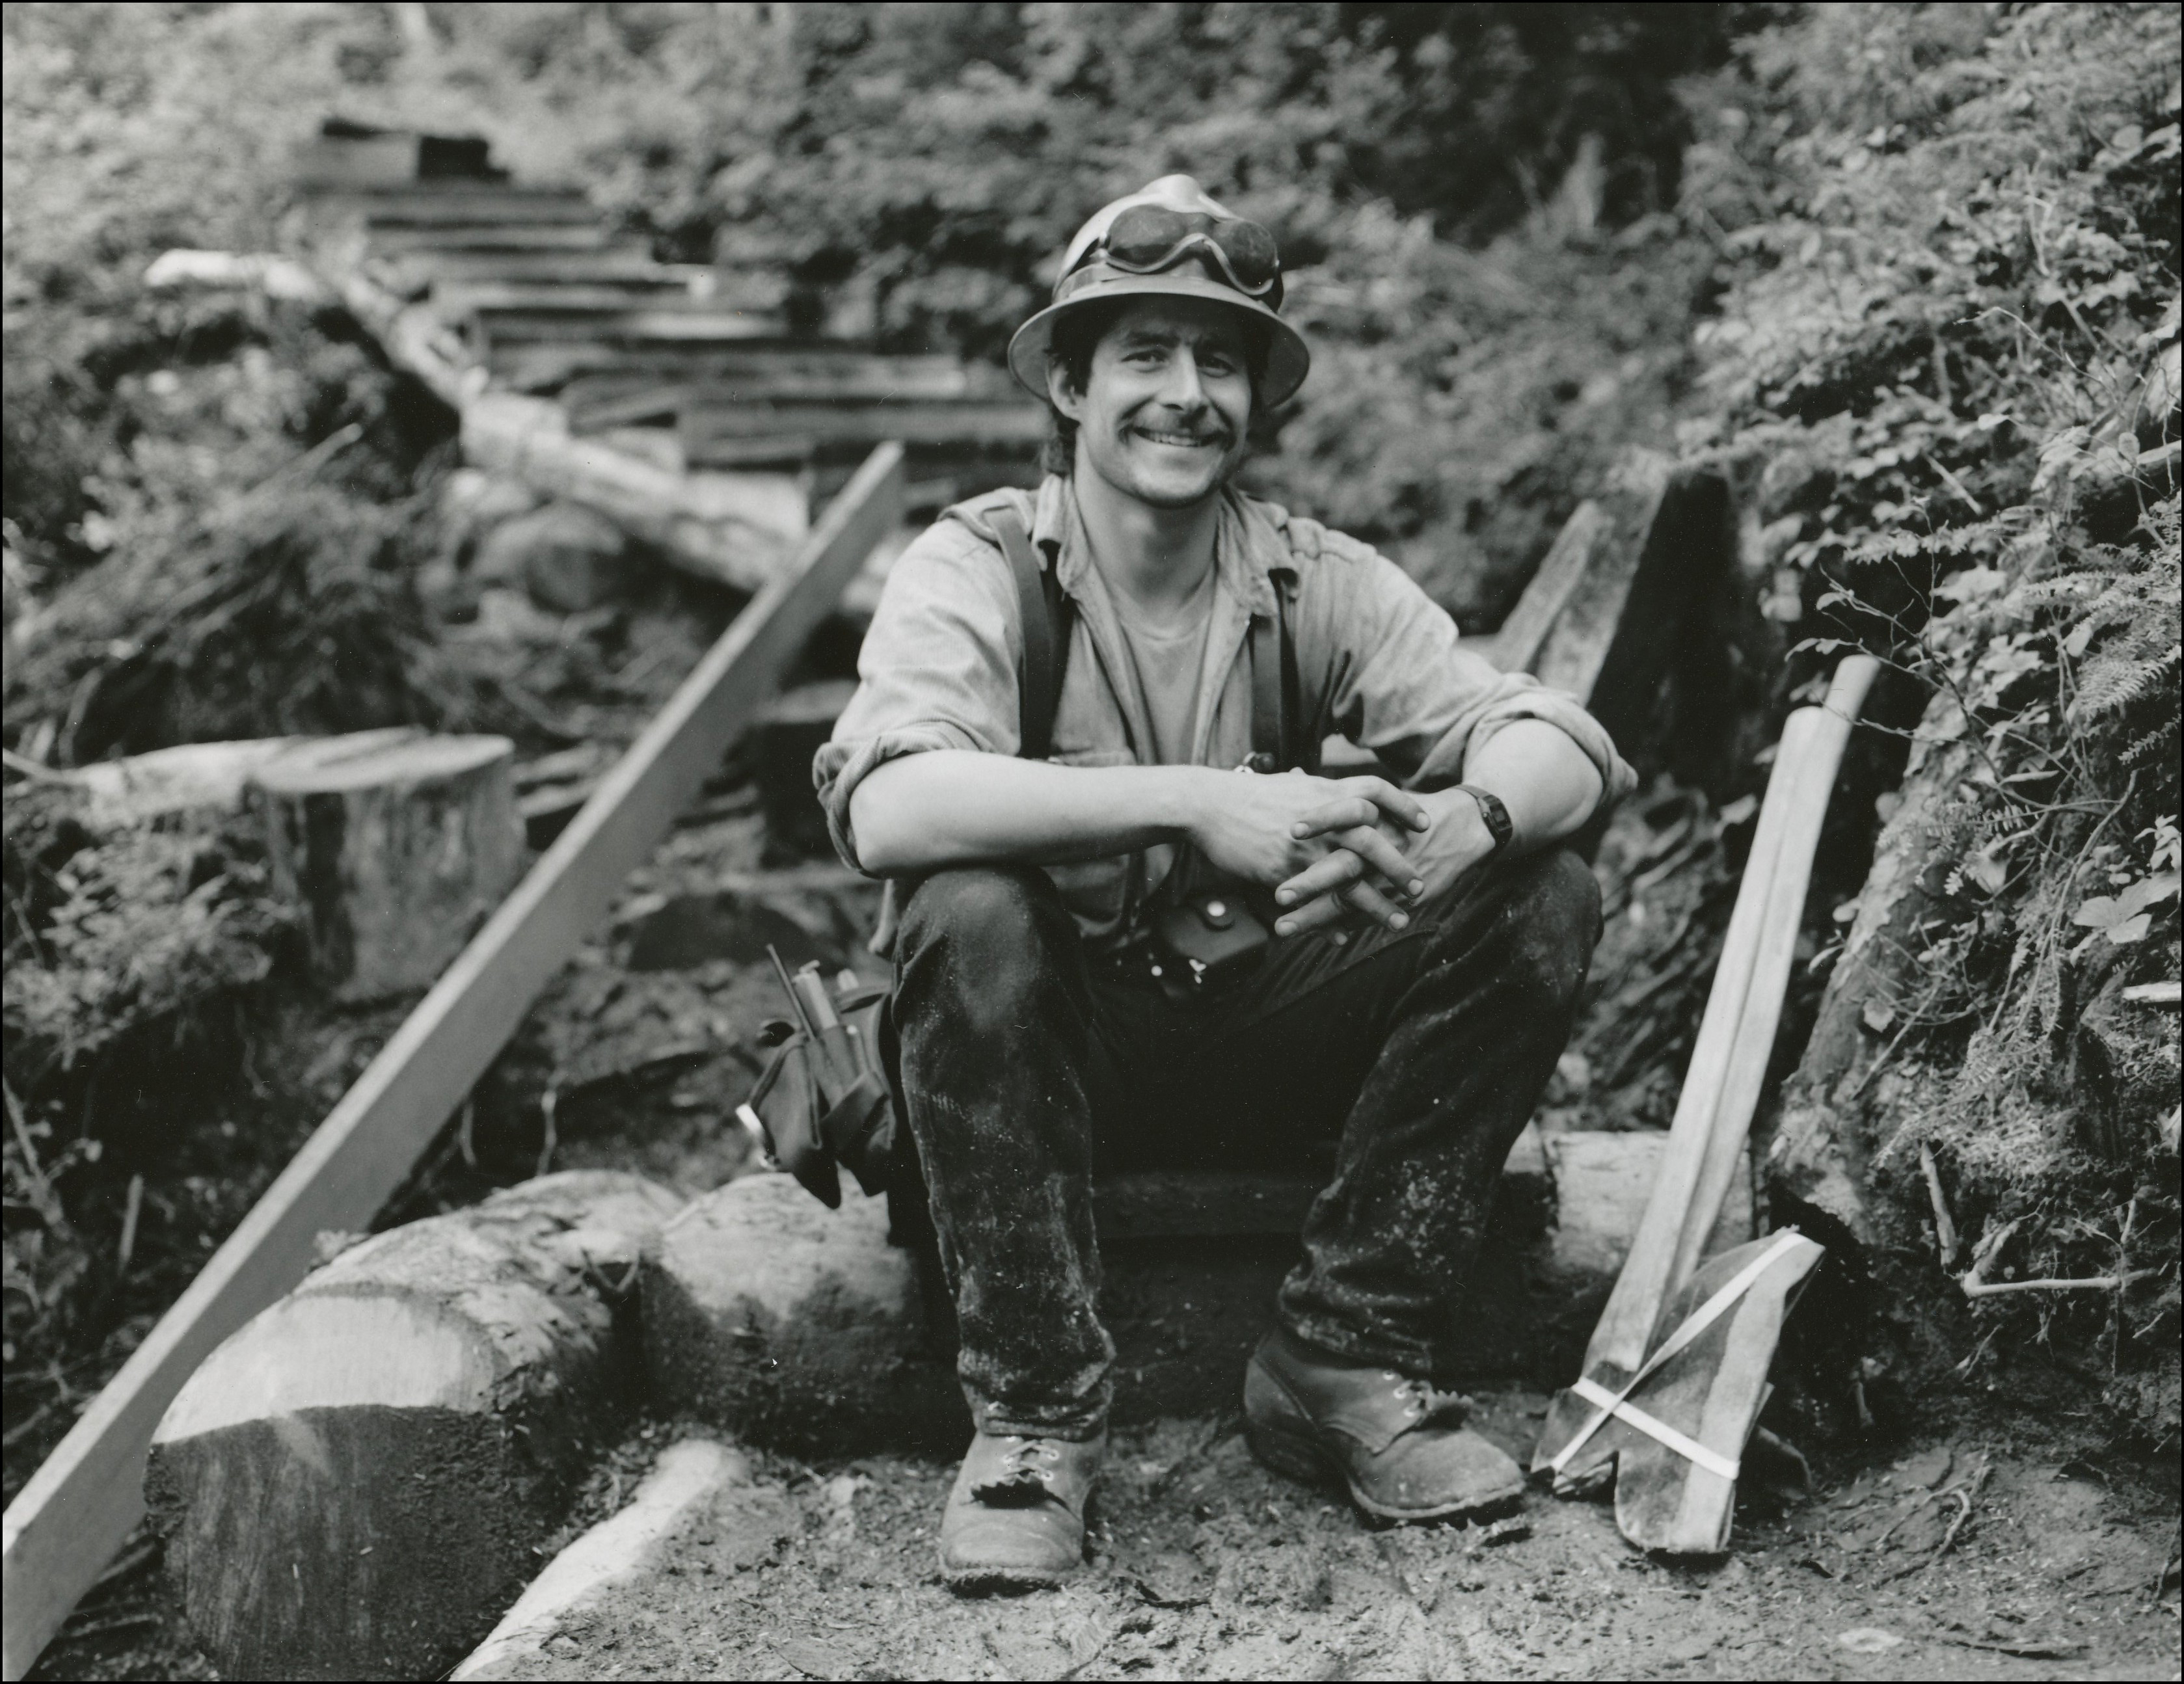 Miner with hard hat sitting on a step at the bottom of a trail smiling